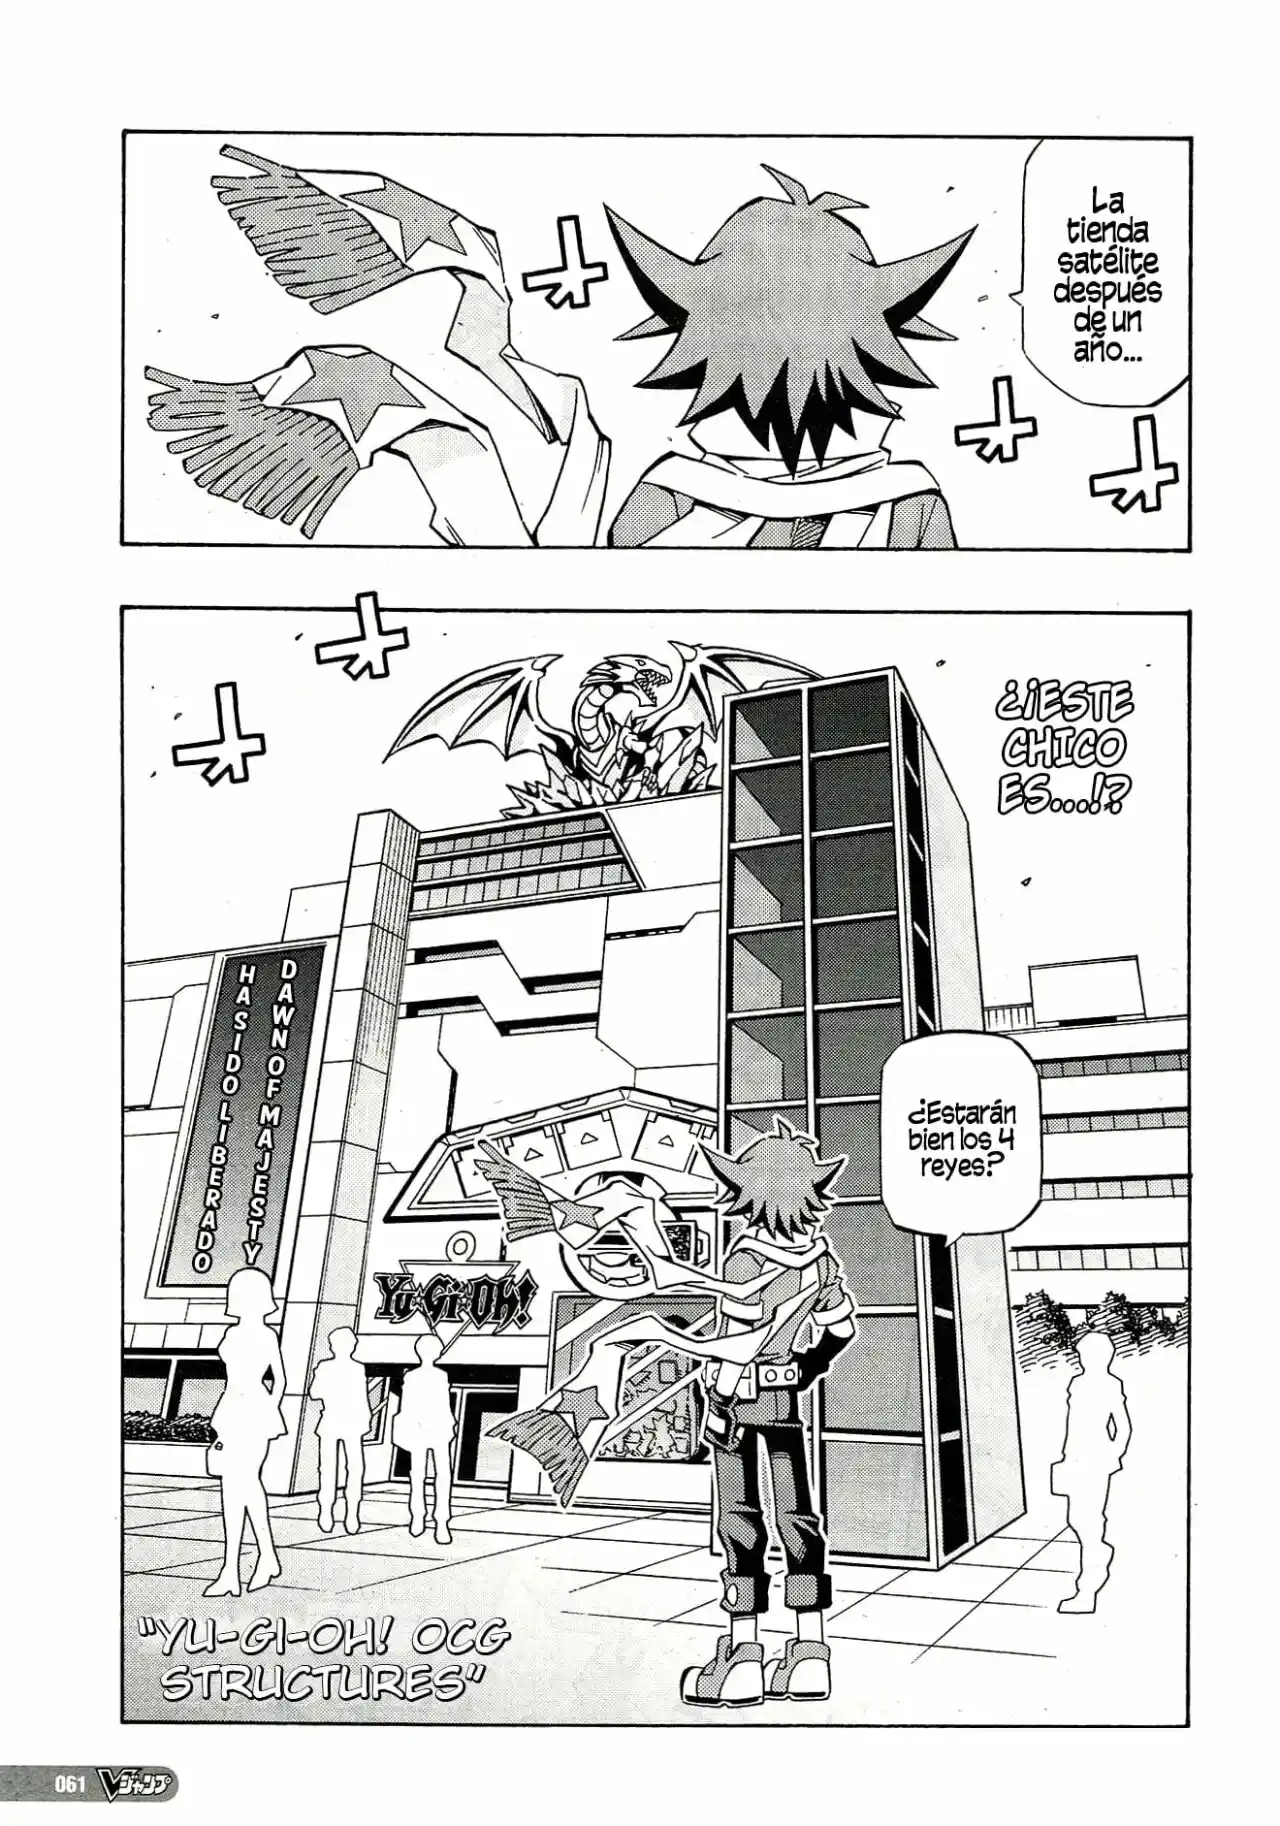 Yu-Gi-Oh! OCG Structures: Chapter 22 - Page 1